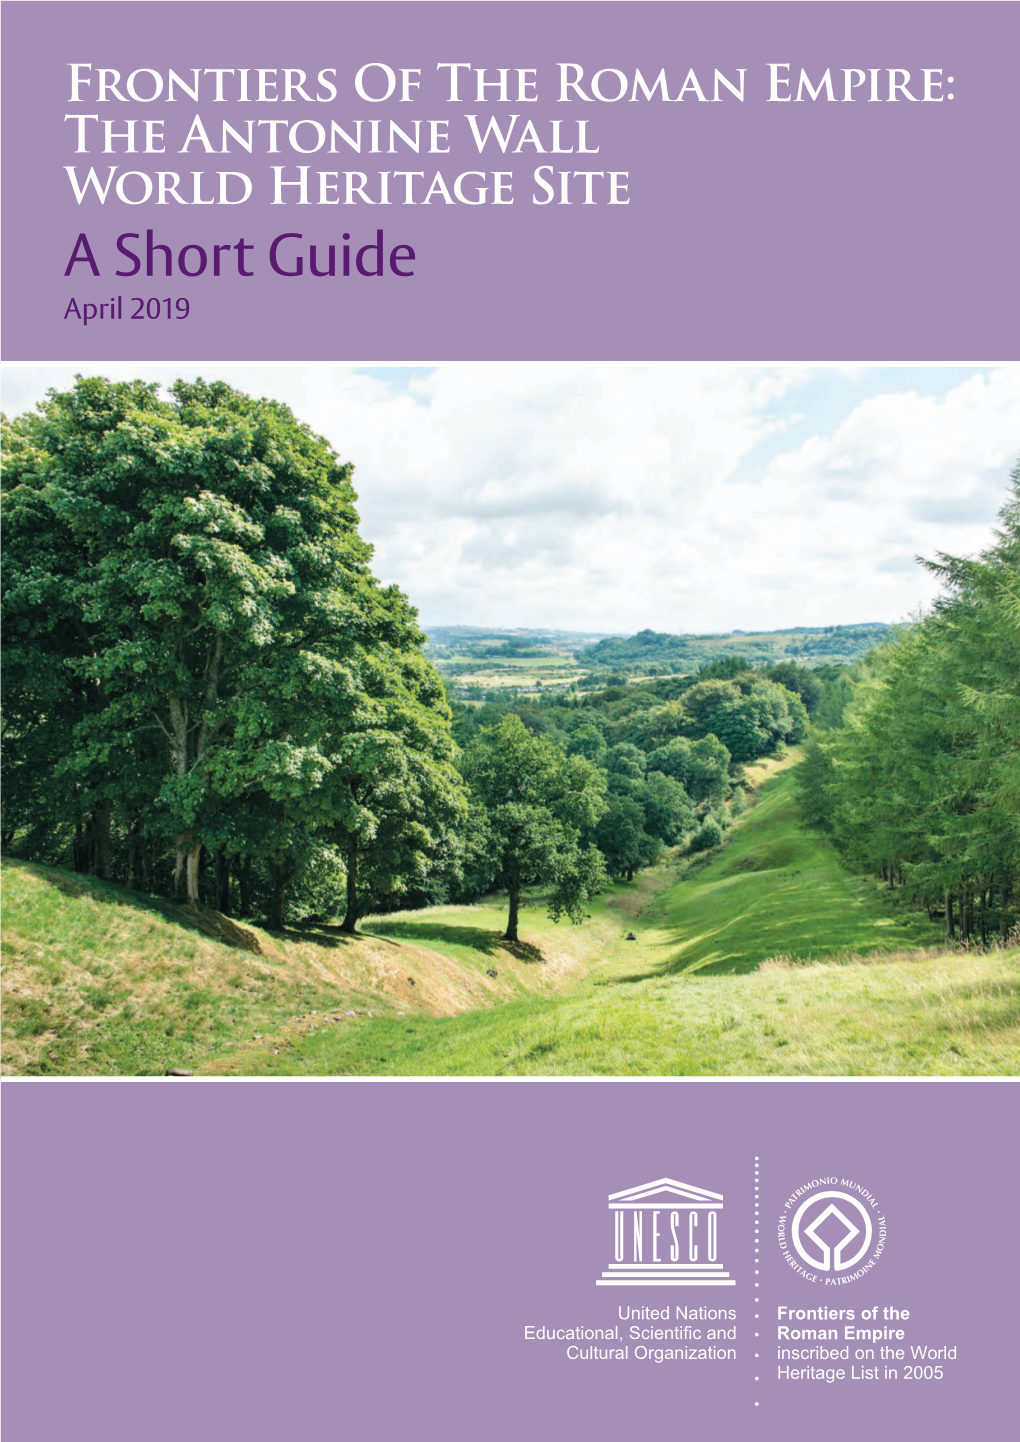 The Antonine Wall World Heritage Site: a Short Guide